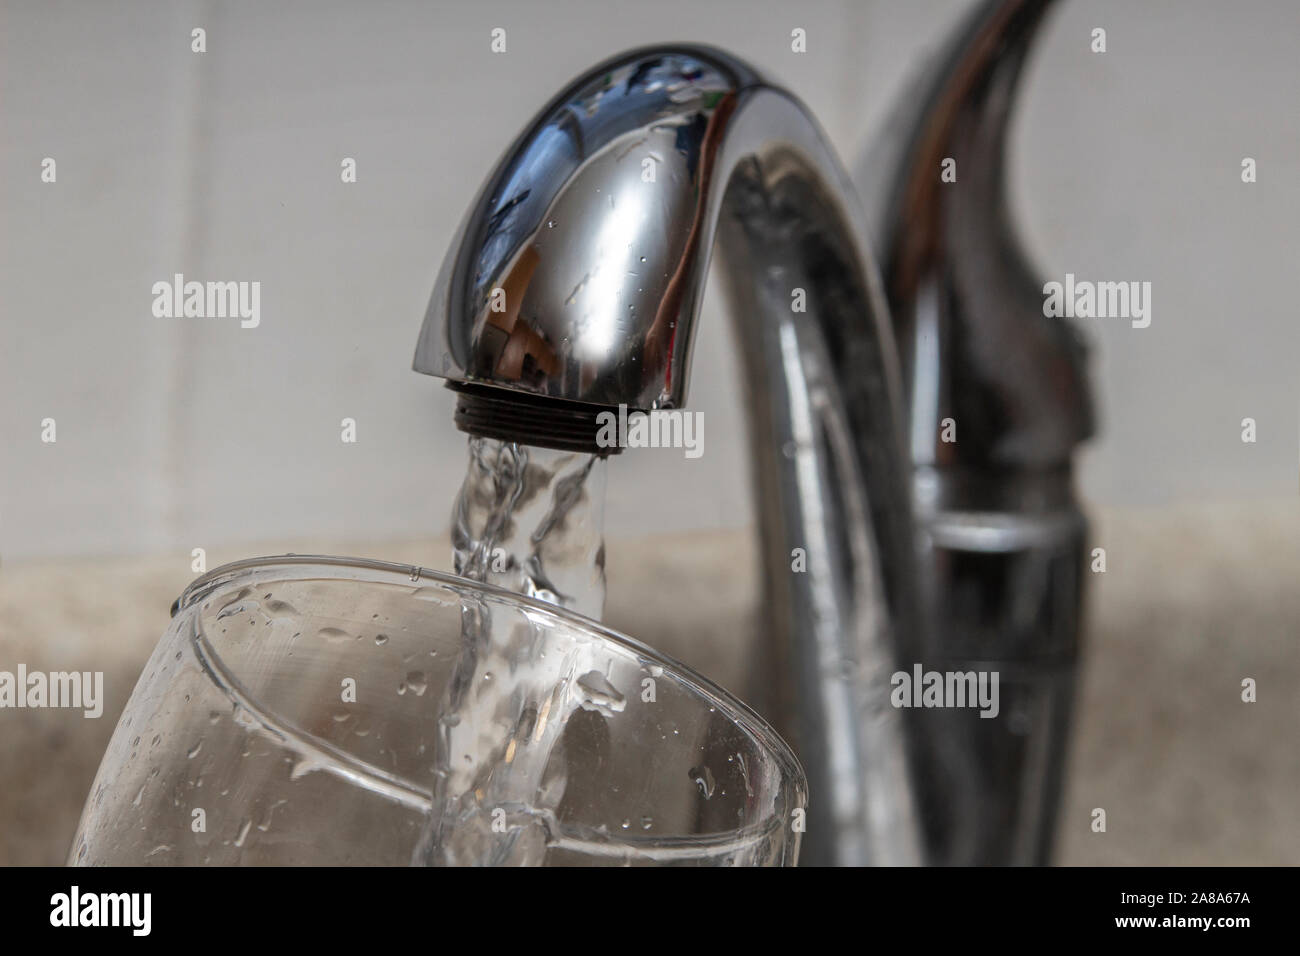 Glass at water tap and filling water with lead contamination Stock Photo